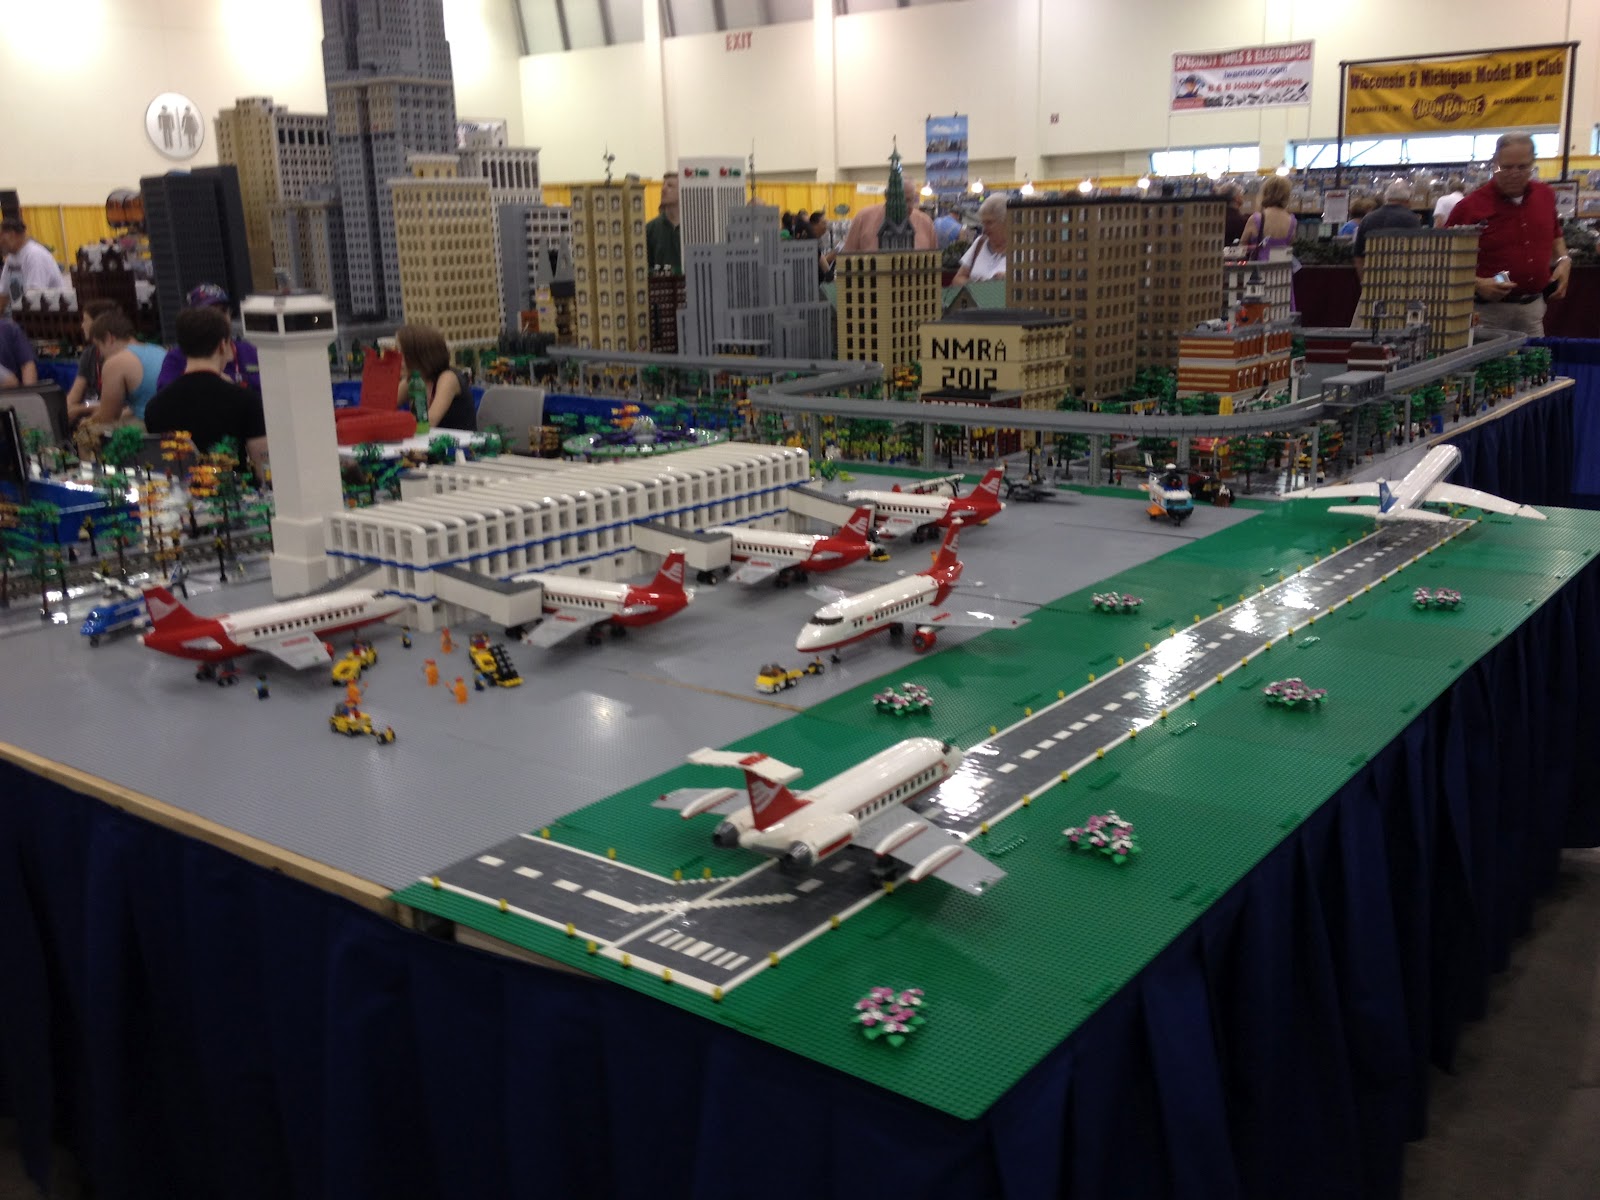 This is an awesome Lego Trains Display at the show.